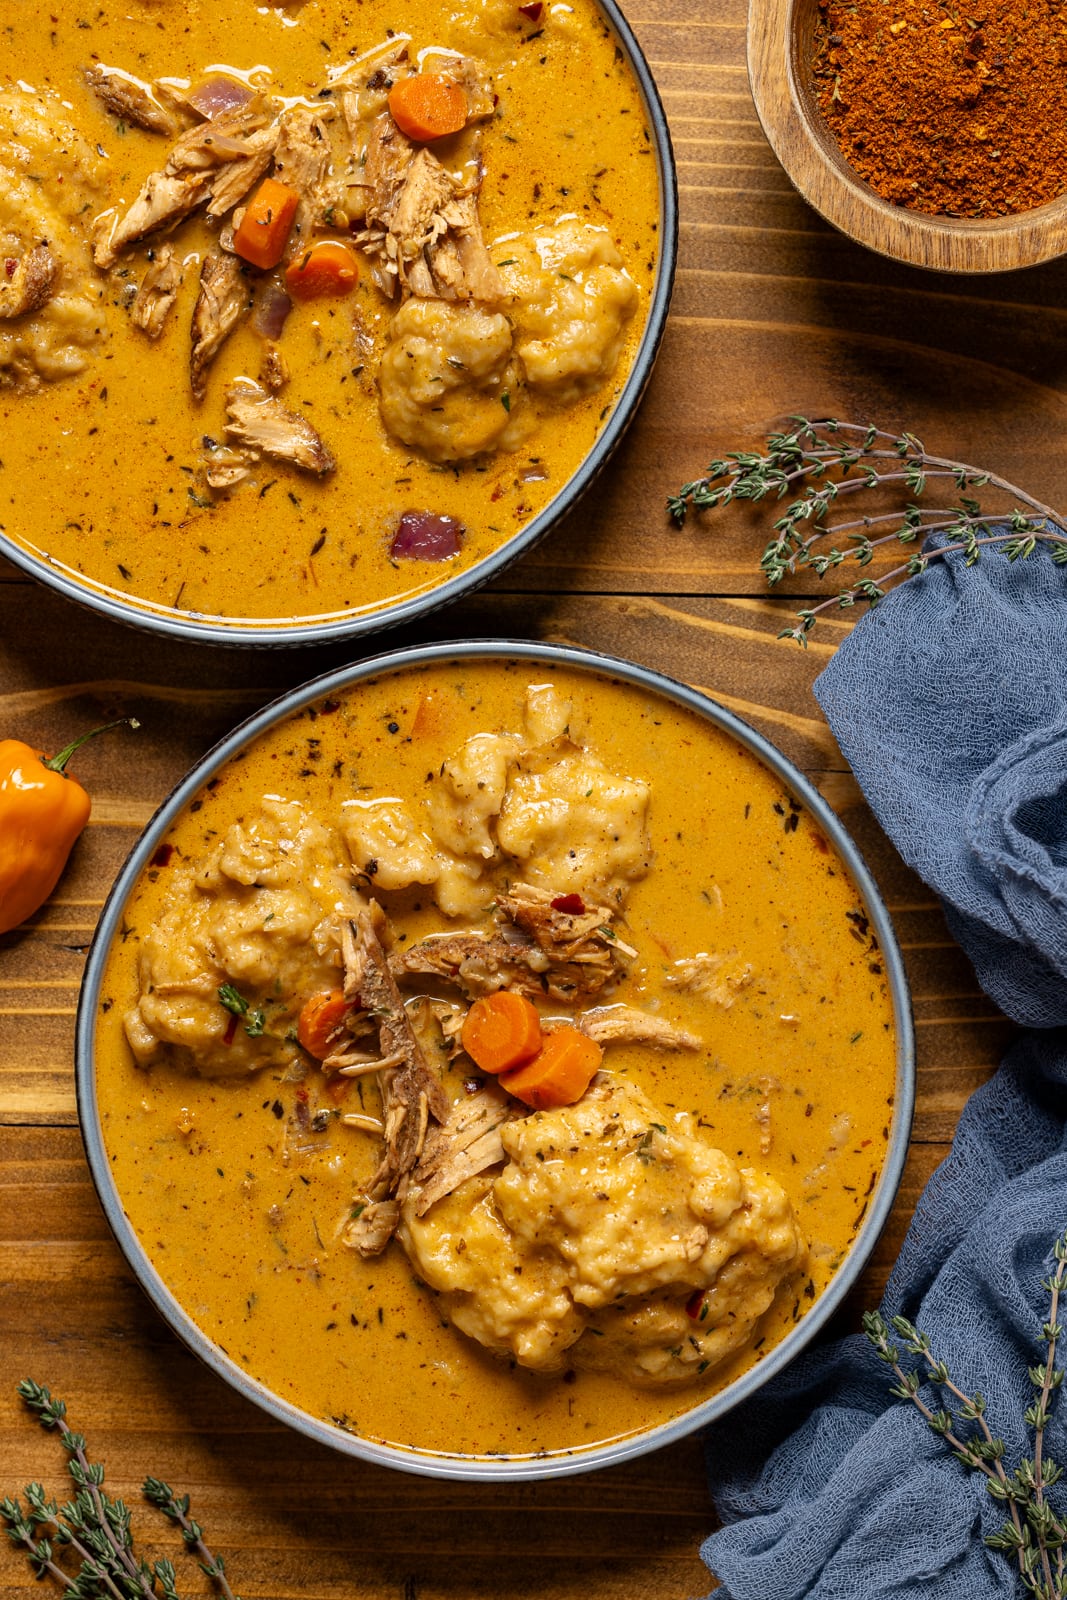 Two bowls of chicken and dumplings on a brown wood table.